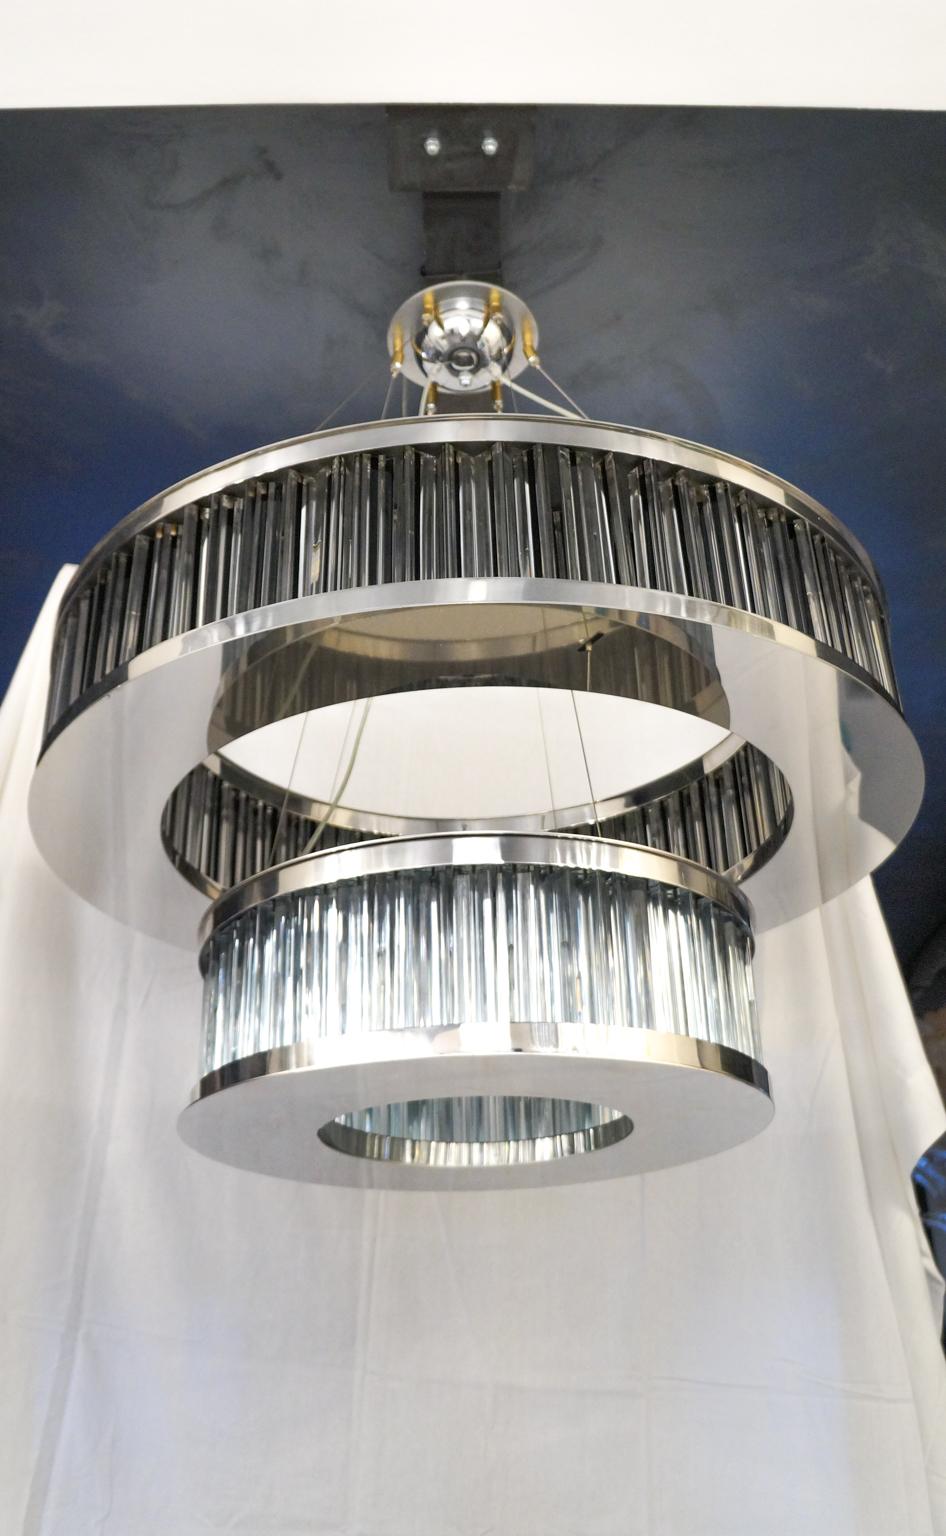 Certainly an effigy chandelier, which is structured in two metal rings vaguely reminiscent of the satellites of the planet Saturn. The first ring, the largest, is made up of 150 tryedral glass elements, while the second ring is made up of 84